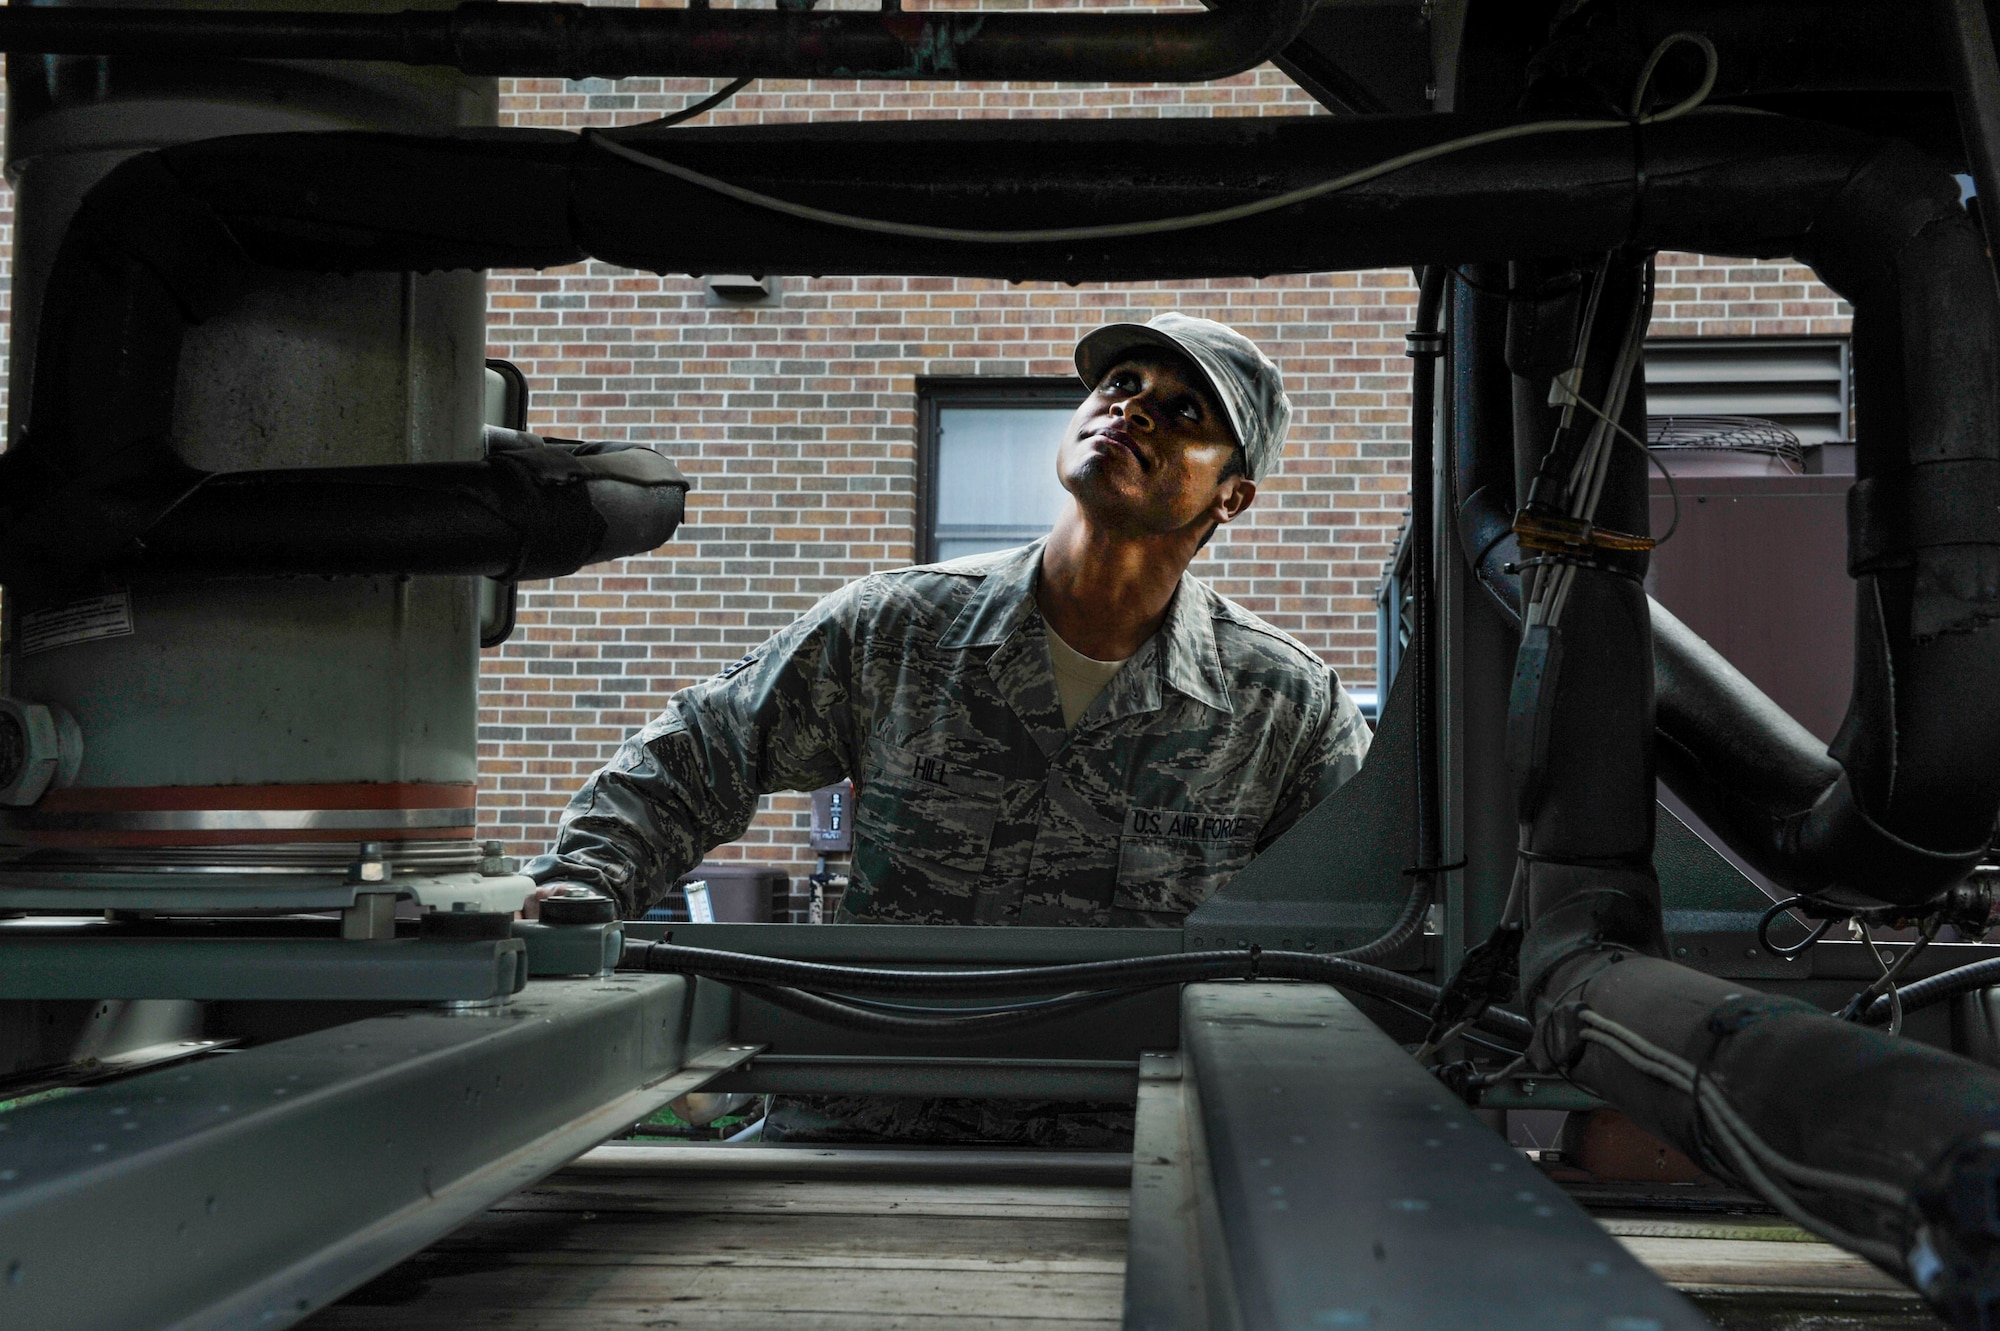 U.S. Air Force Senior Airman Pierre Hill, 19th Civil Engineer Squadron heating, ventilating and air conditioning journeyman, ensures the condenser coil of a portable chiller is clean and free of debris Aug. 9, 2016, at Little Rock Air Force Base, Ark.  Portable Chillers supply necessary cooling for buildings when the main air condintioning unit does not work properly. (U.S. Air Force photo by Senior Airman Stephanie Serrano) 